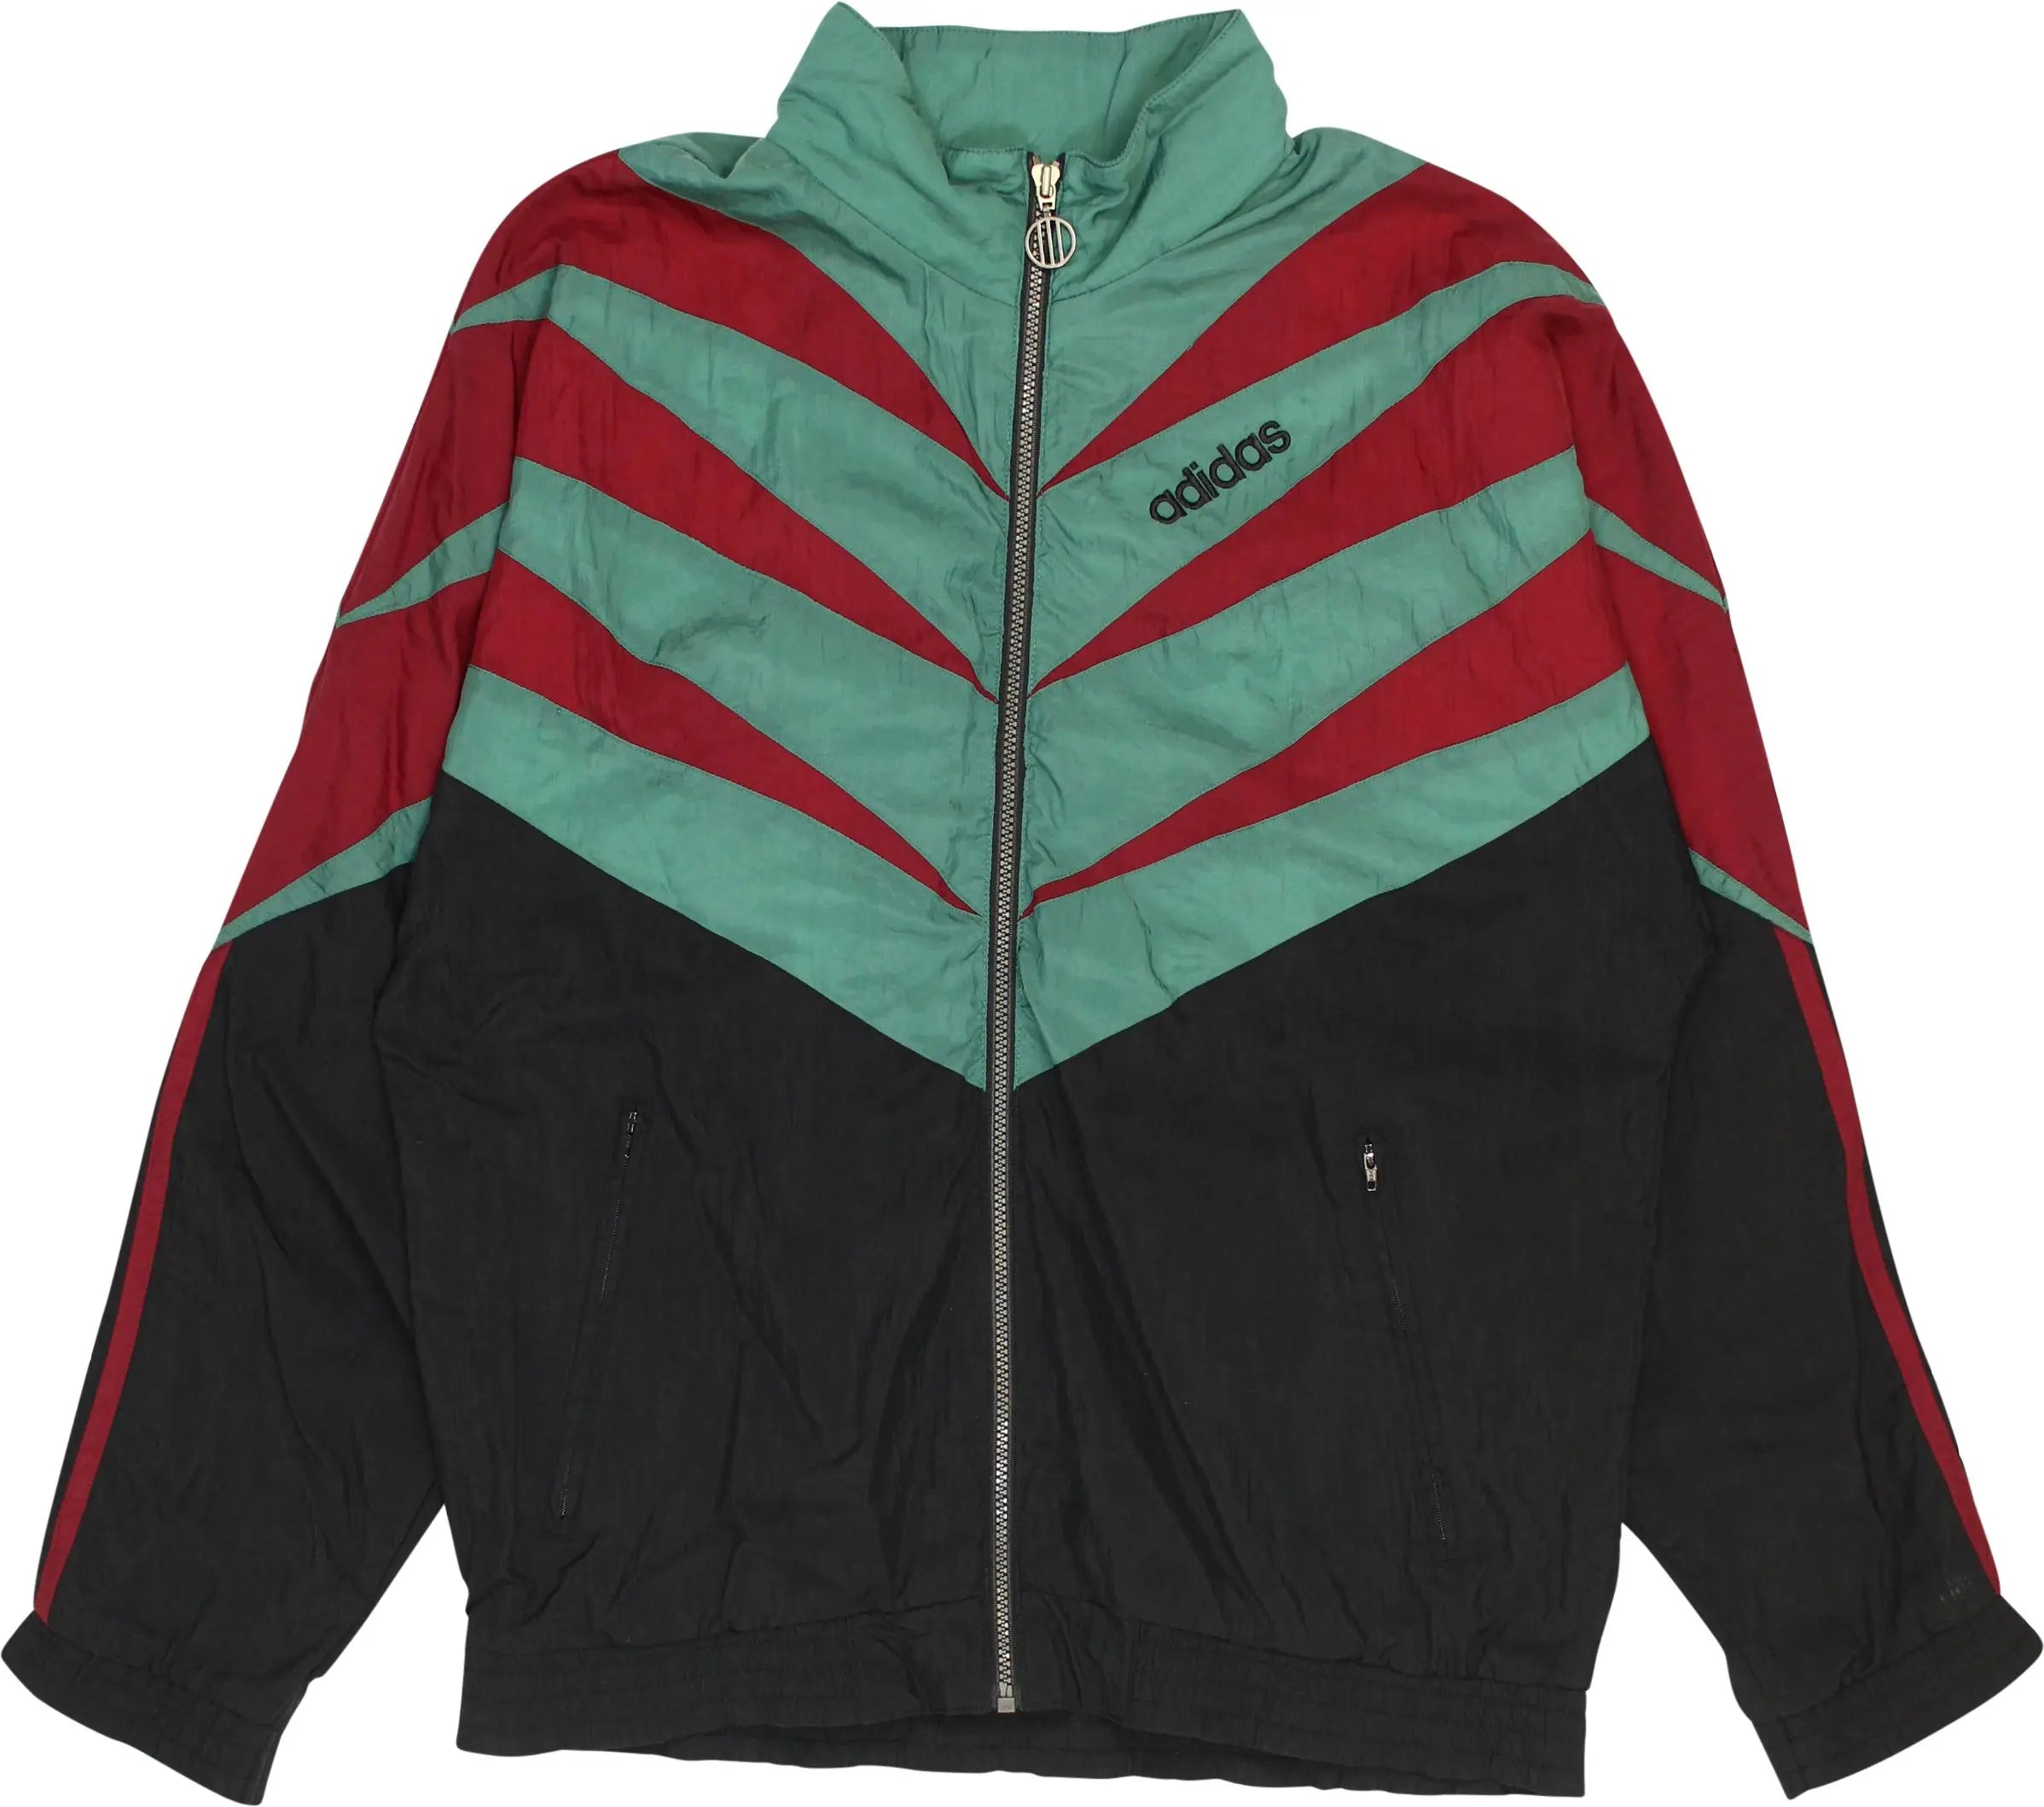 Adidas - 80s Track Jacket by Adidas- ThriftTale.com - Vintage and second handclothing